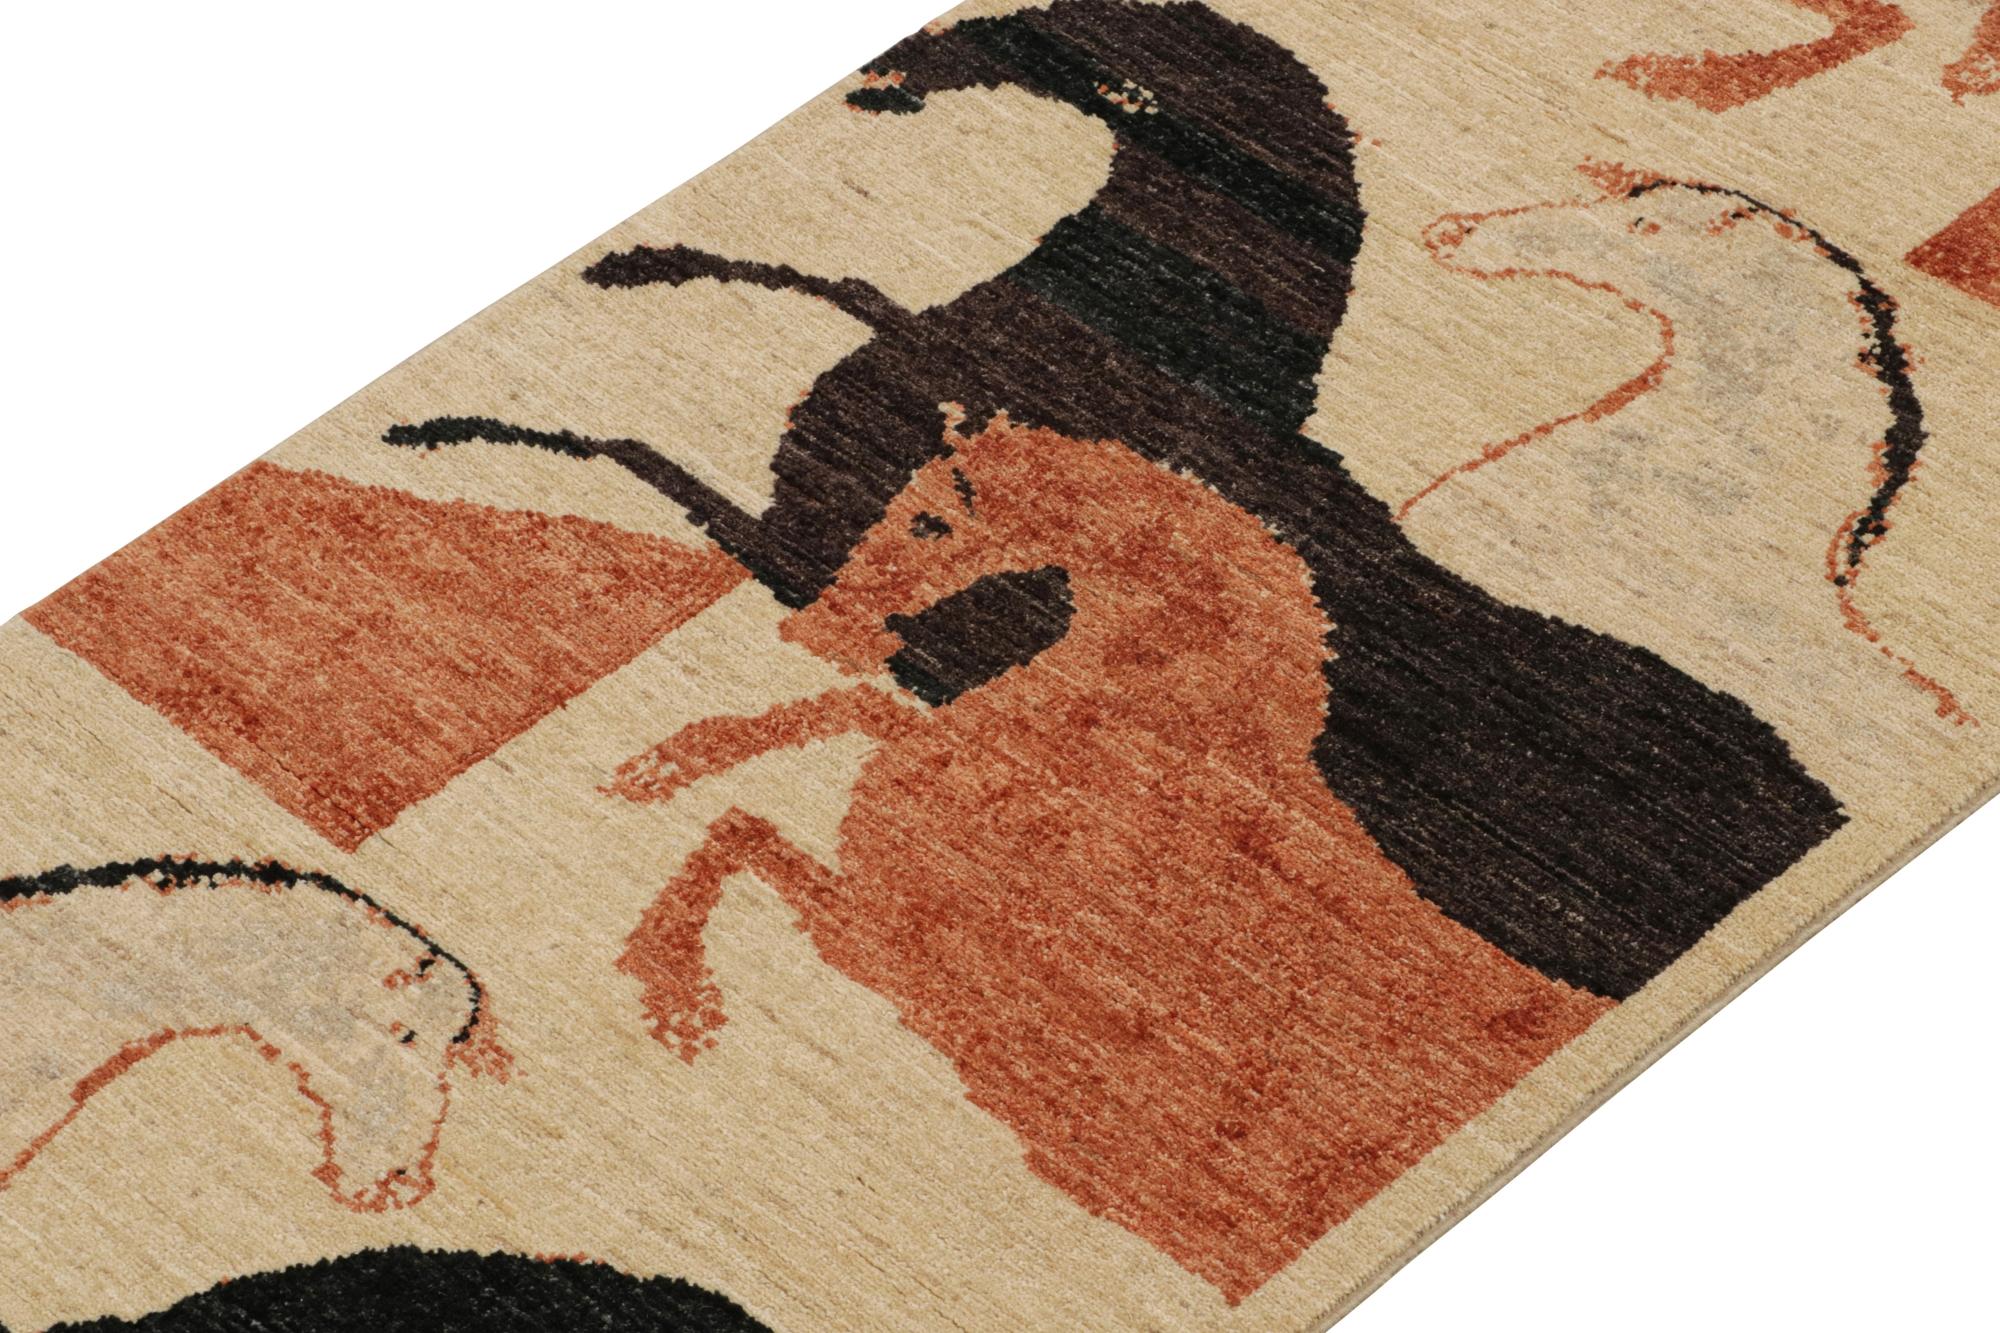 This new addition to Rug & Kilim’s Modern Classics collection is a 3x10 pictorial runner—a contemporary resurrection of one of the most collectible primitivist styles. 

Further on the Design:

Hand-knotted in wool, this piece is inspired by